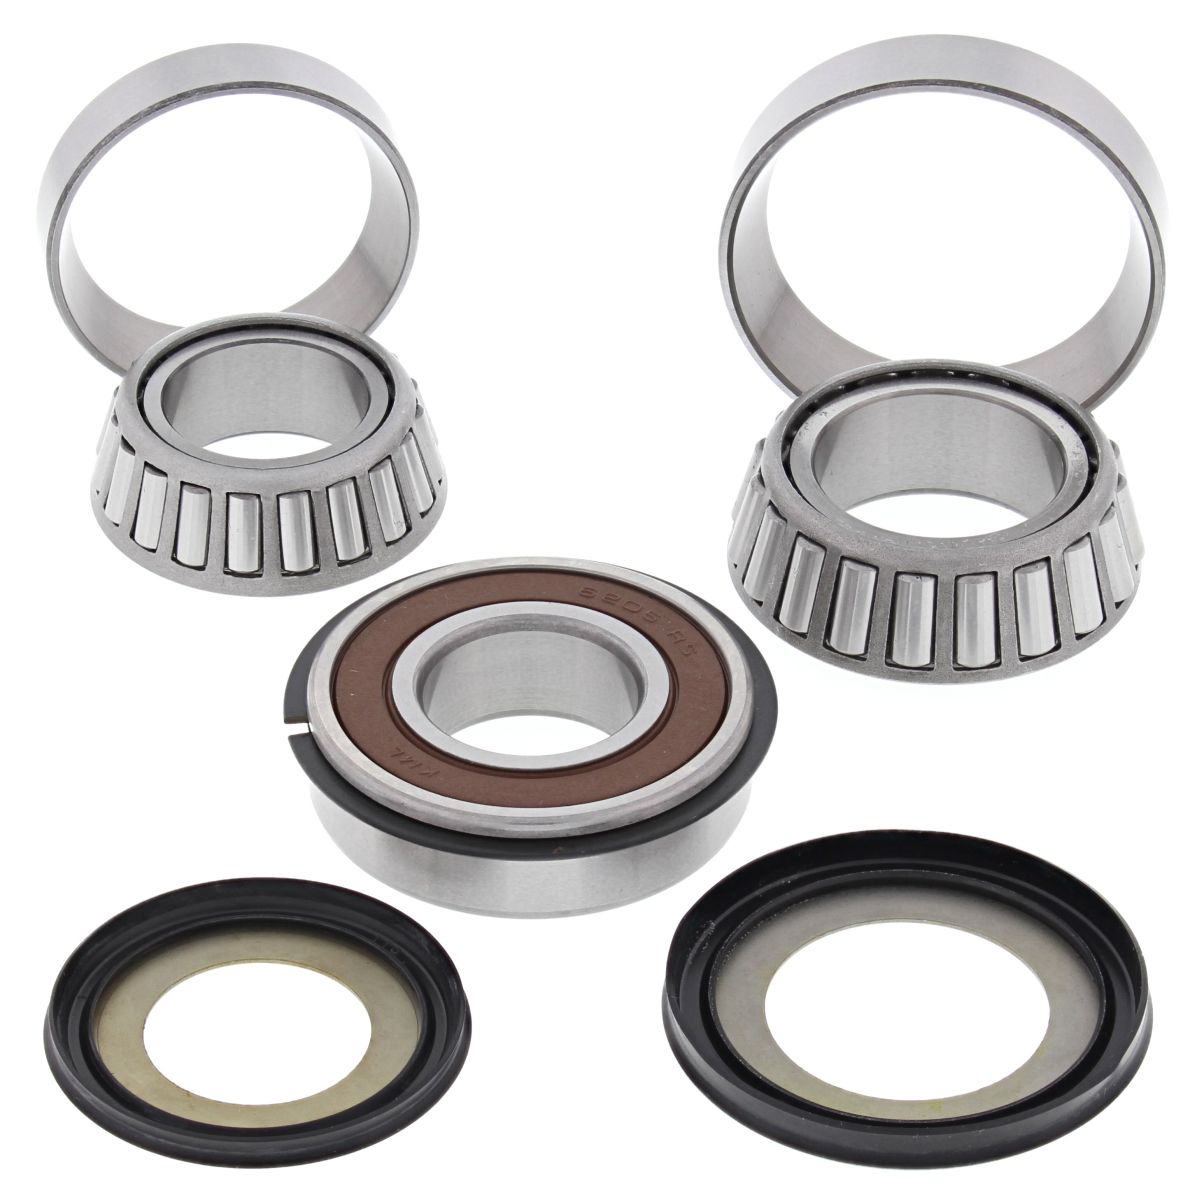 Triumph 1050 Sprint ST Steering Bearings By AllBalls Racing USA 